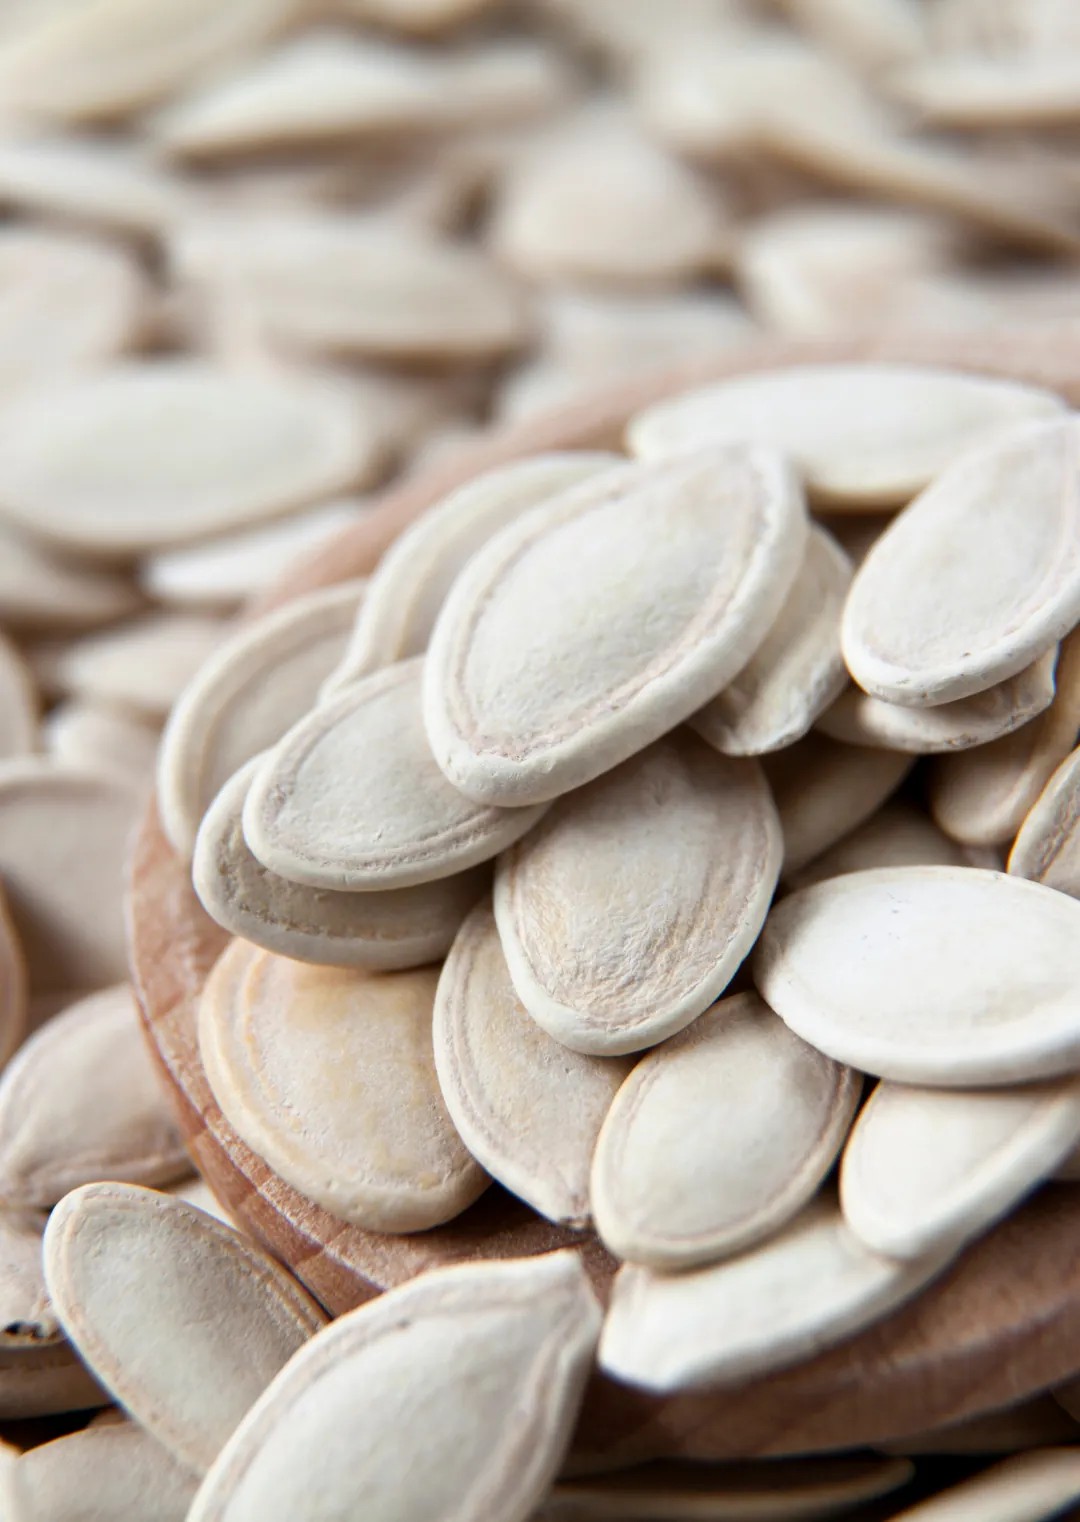 100g Pumpkin Seeds (Roasted and Salted)